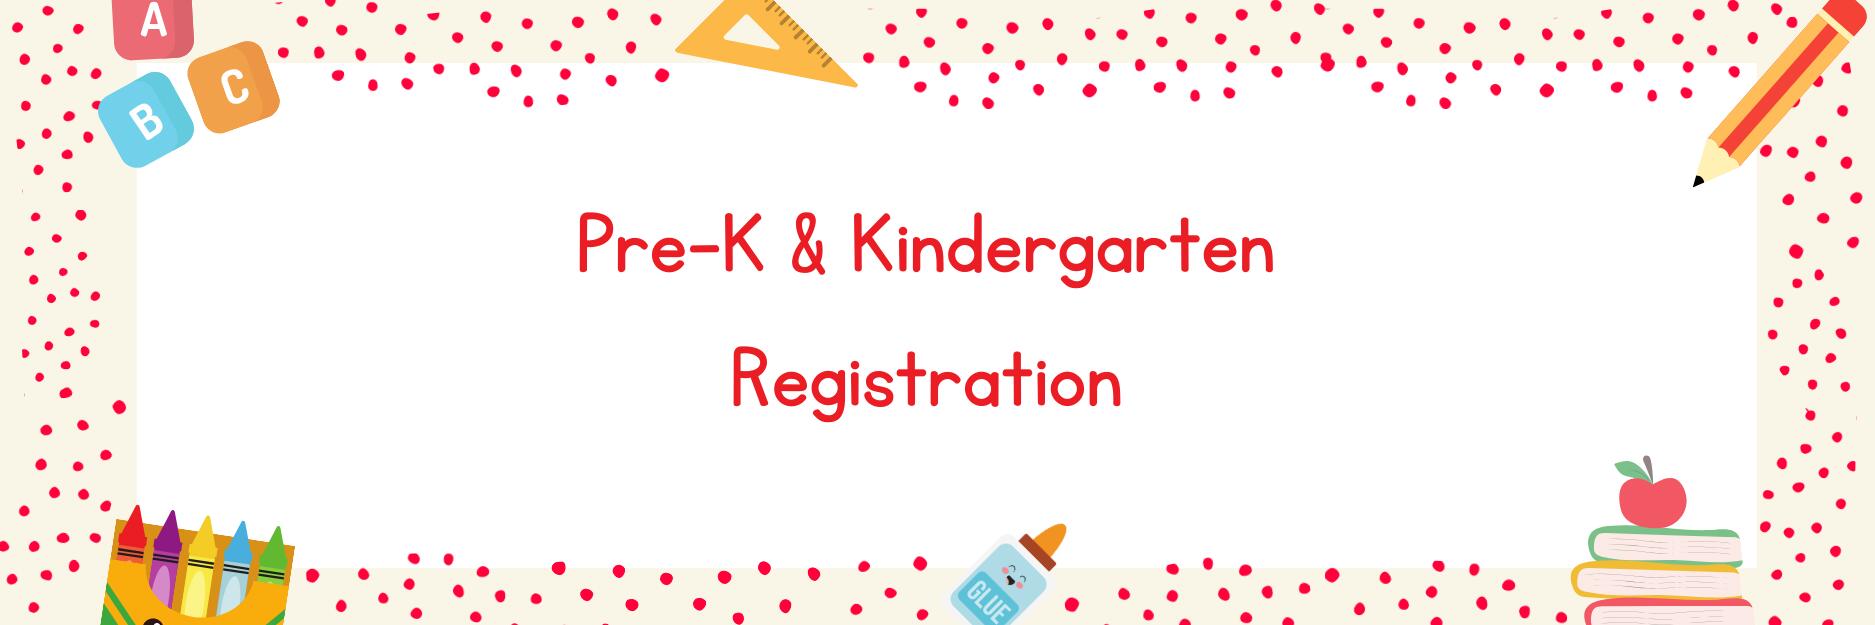 Pre-K and Kindergarten Registration on a stylized background with elementary classroom clipart